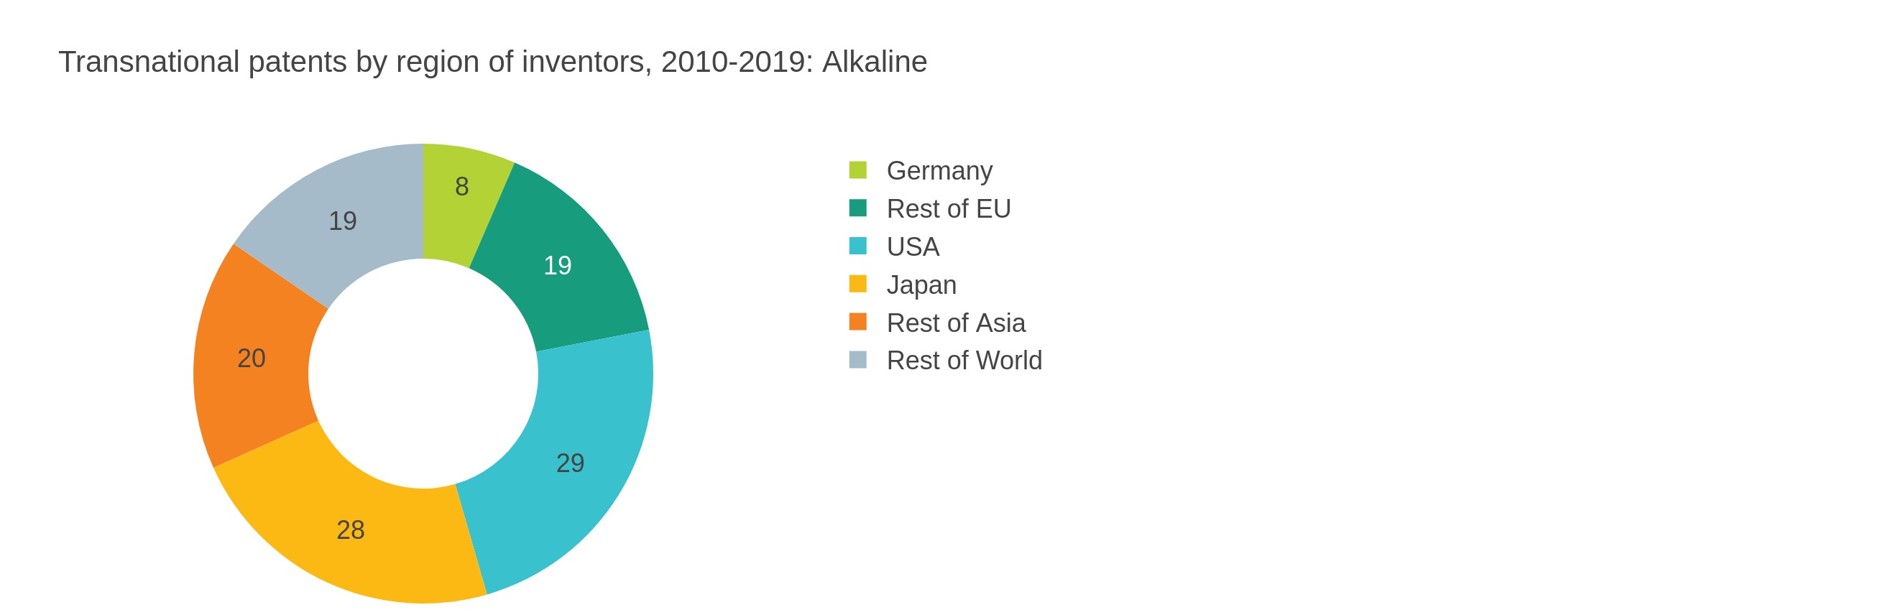 Figure 7: Distribution of transnational patents over world regions for alkaline electrolysis (2010-2019).